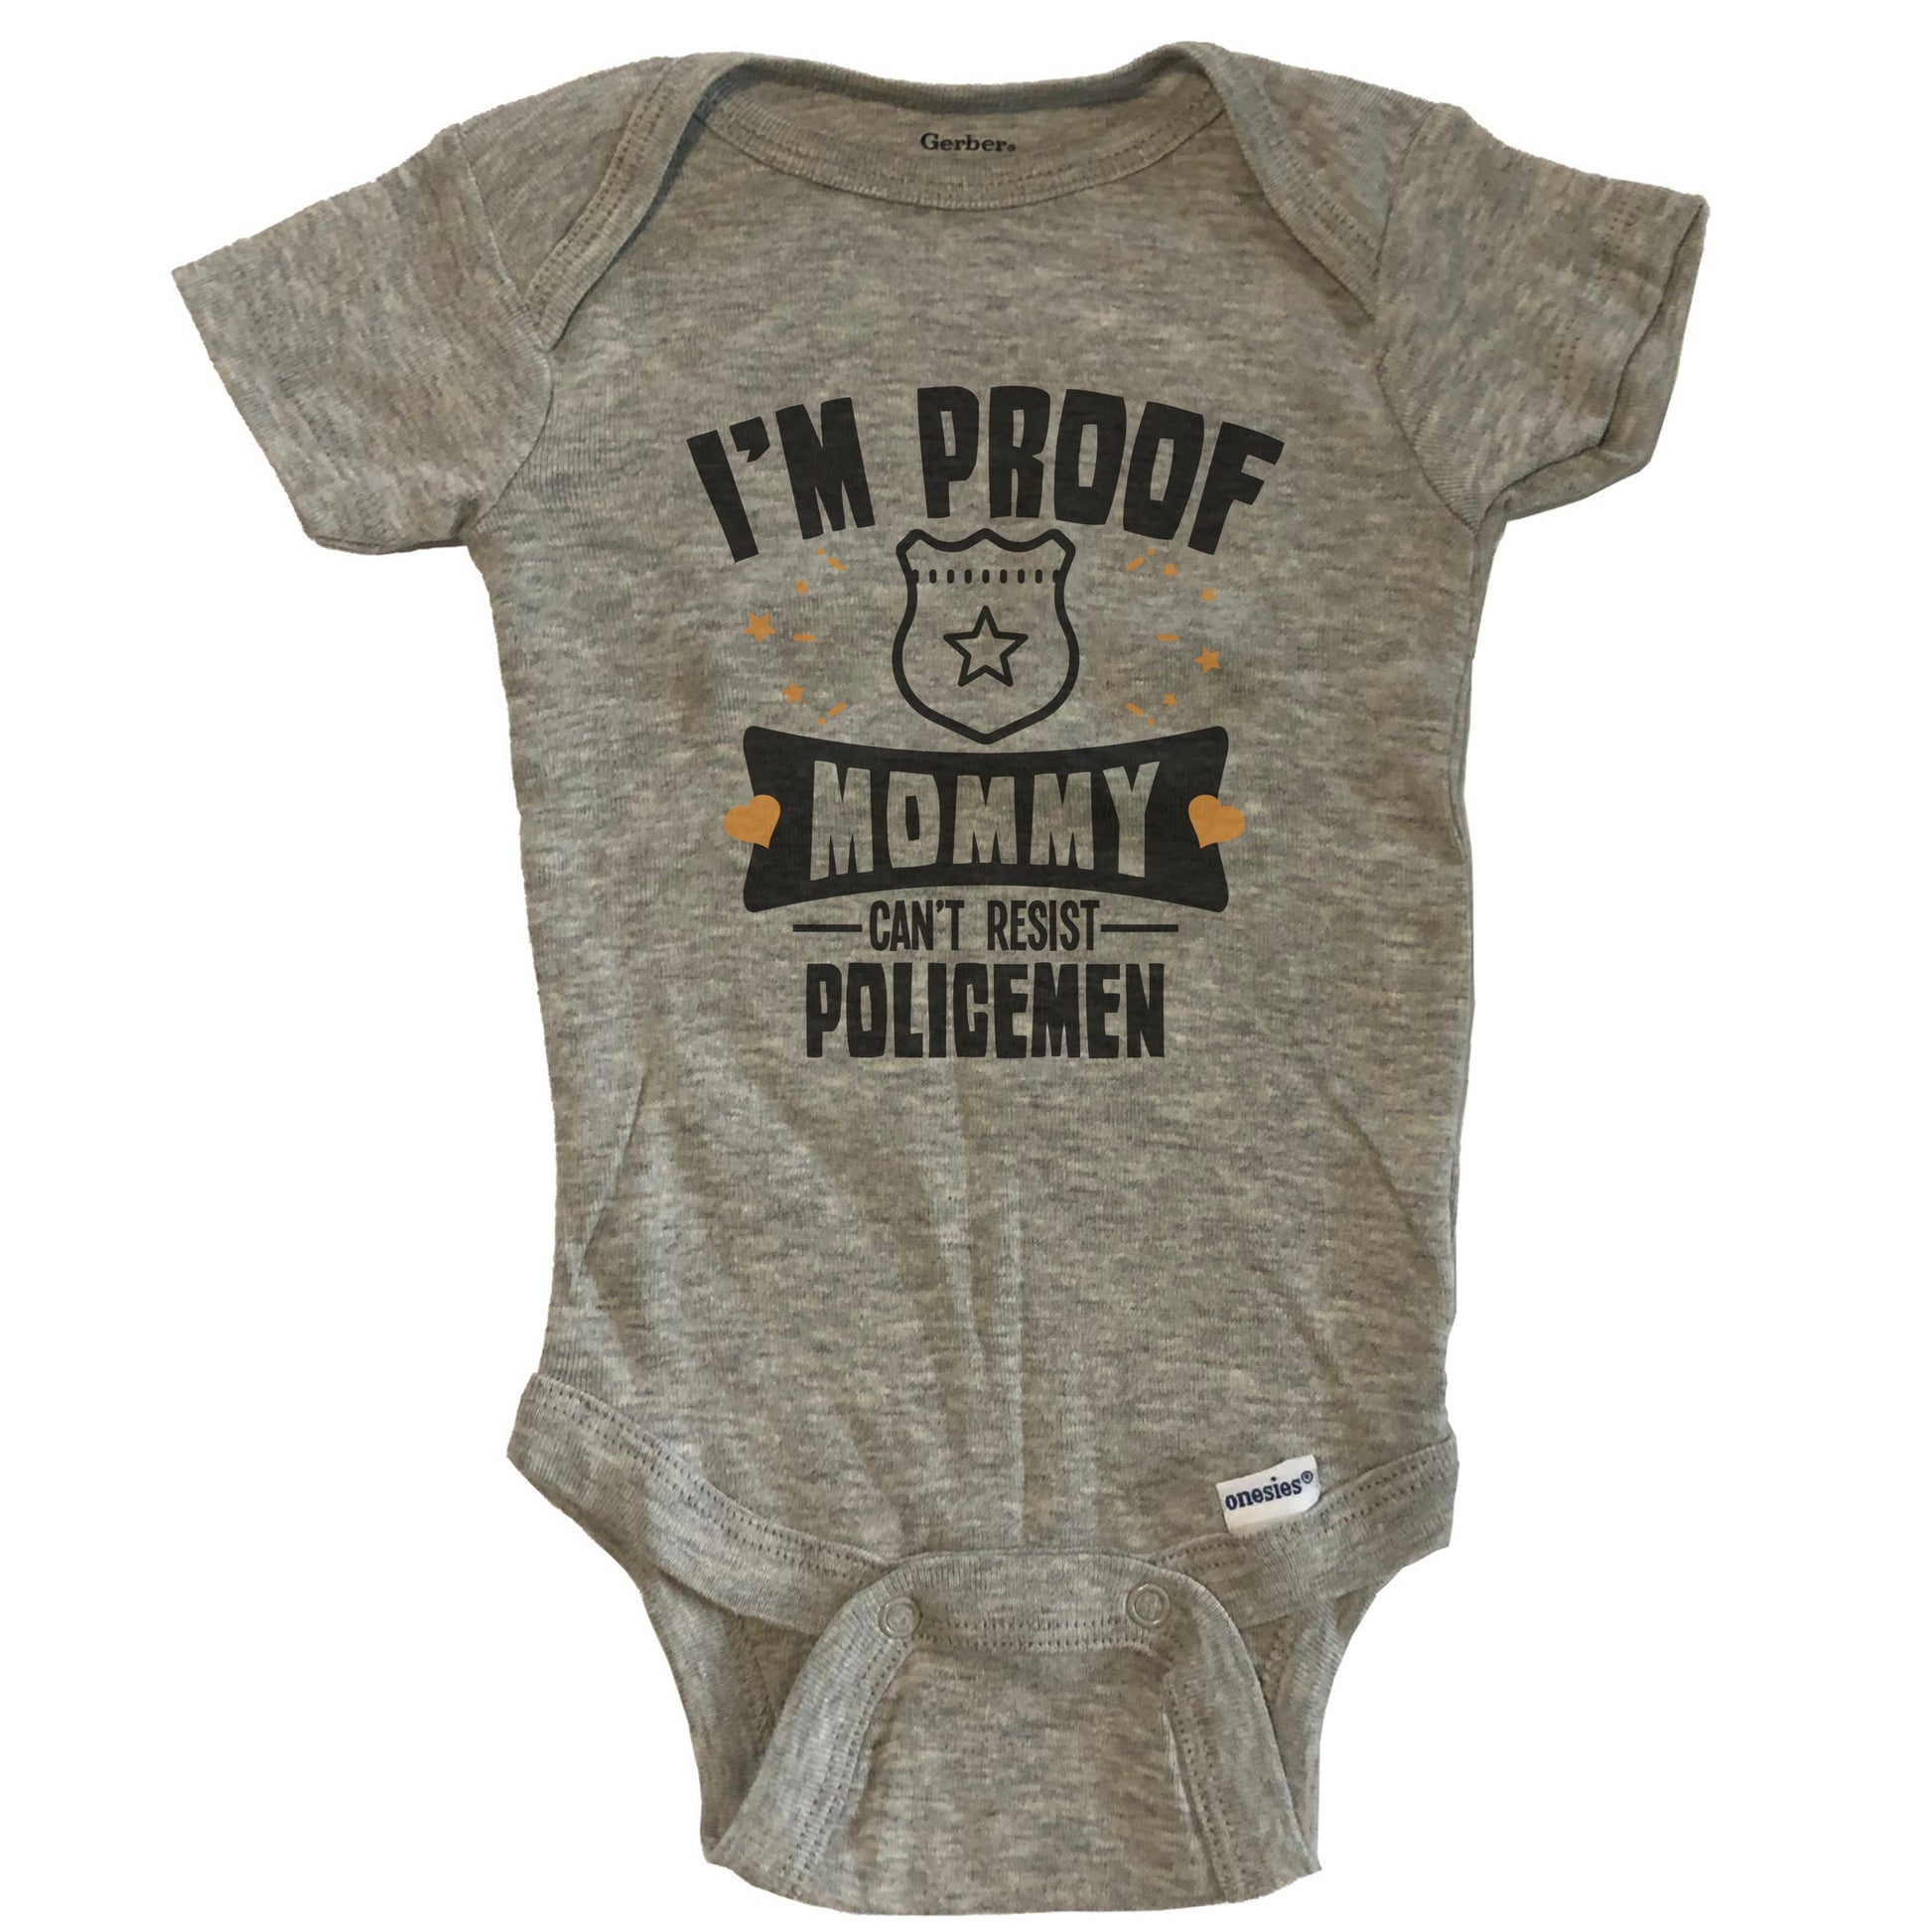 Funny Police Onesie - I'm Proof Mommy Can't Resist Policemen Baby Bodysuit